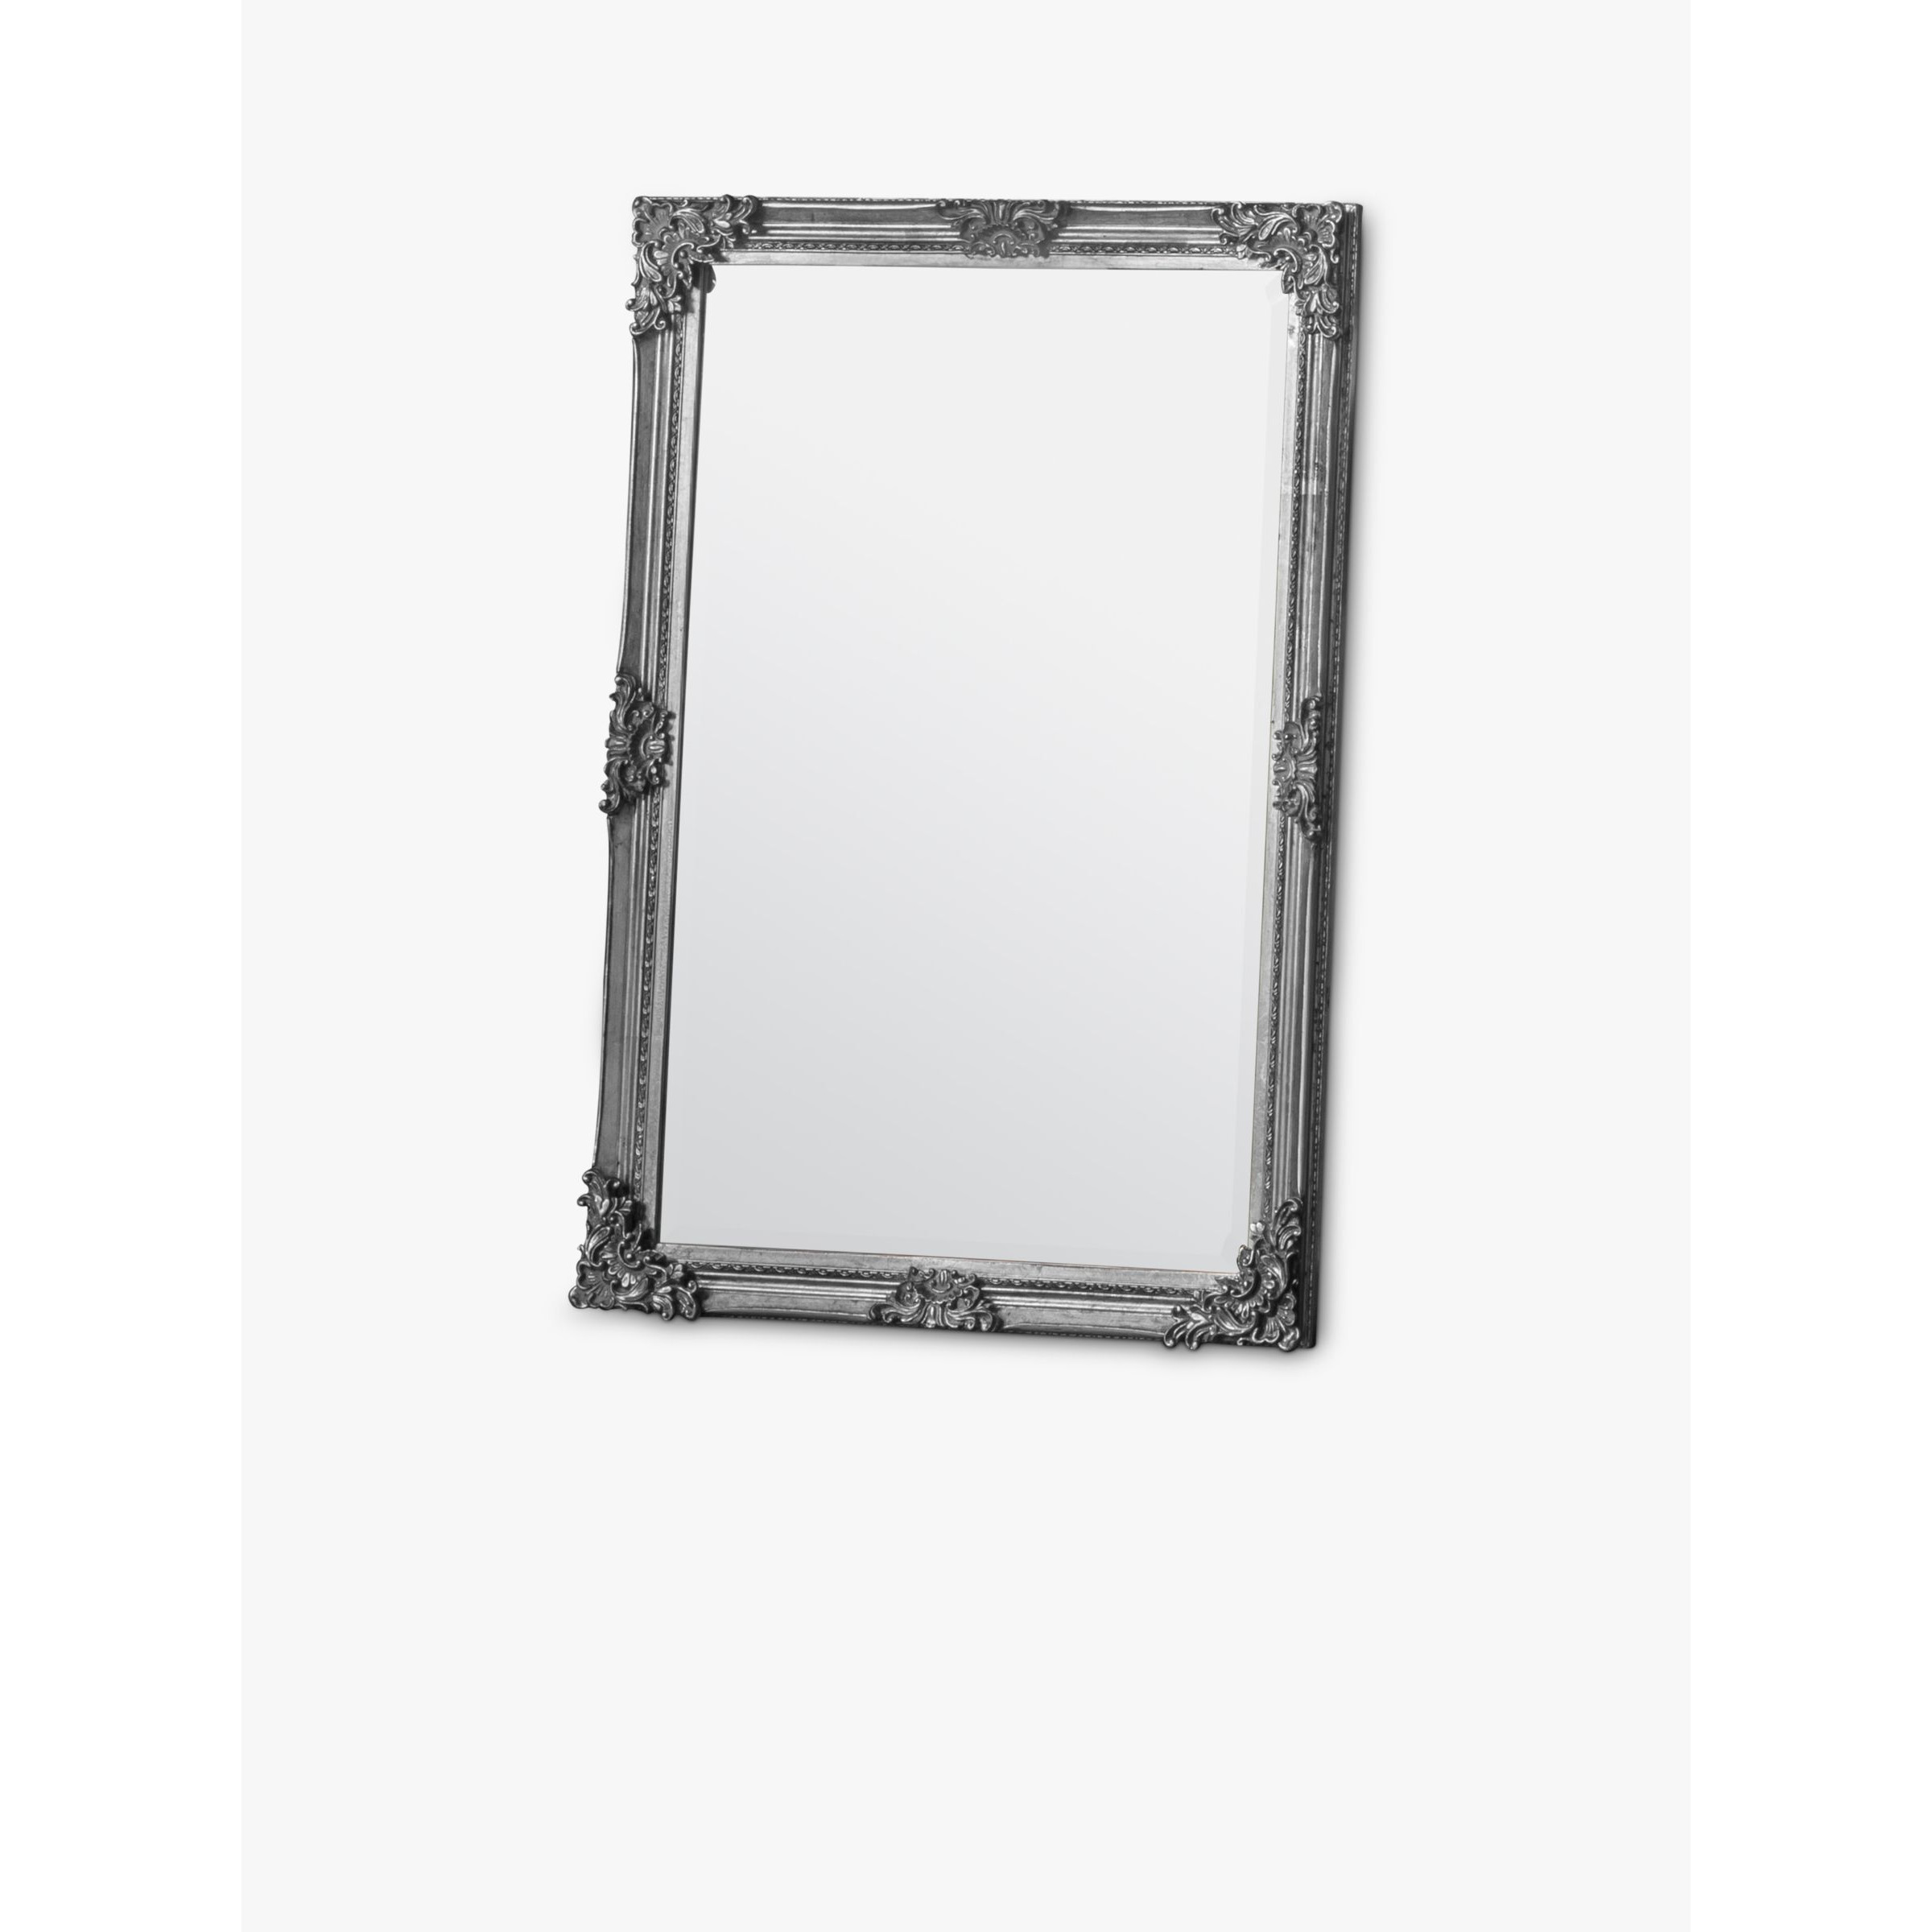 Gallery Direct Fiennes Rectangular Decorative Frame Wall Mirror, 103 x 70cm - image 1